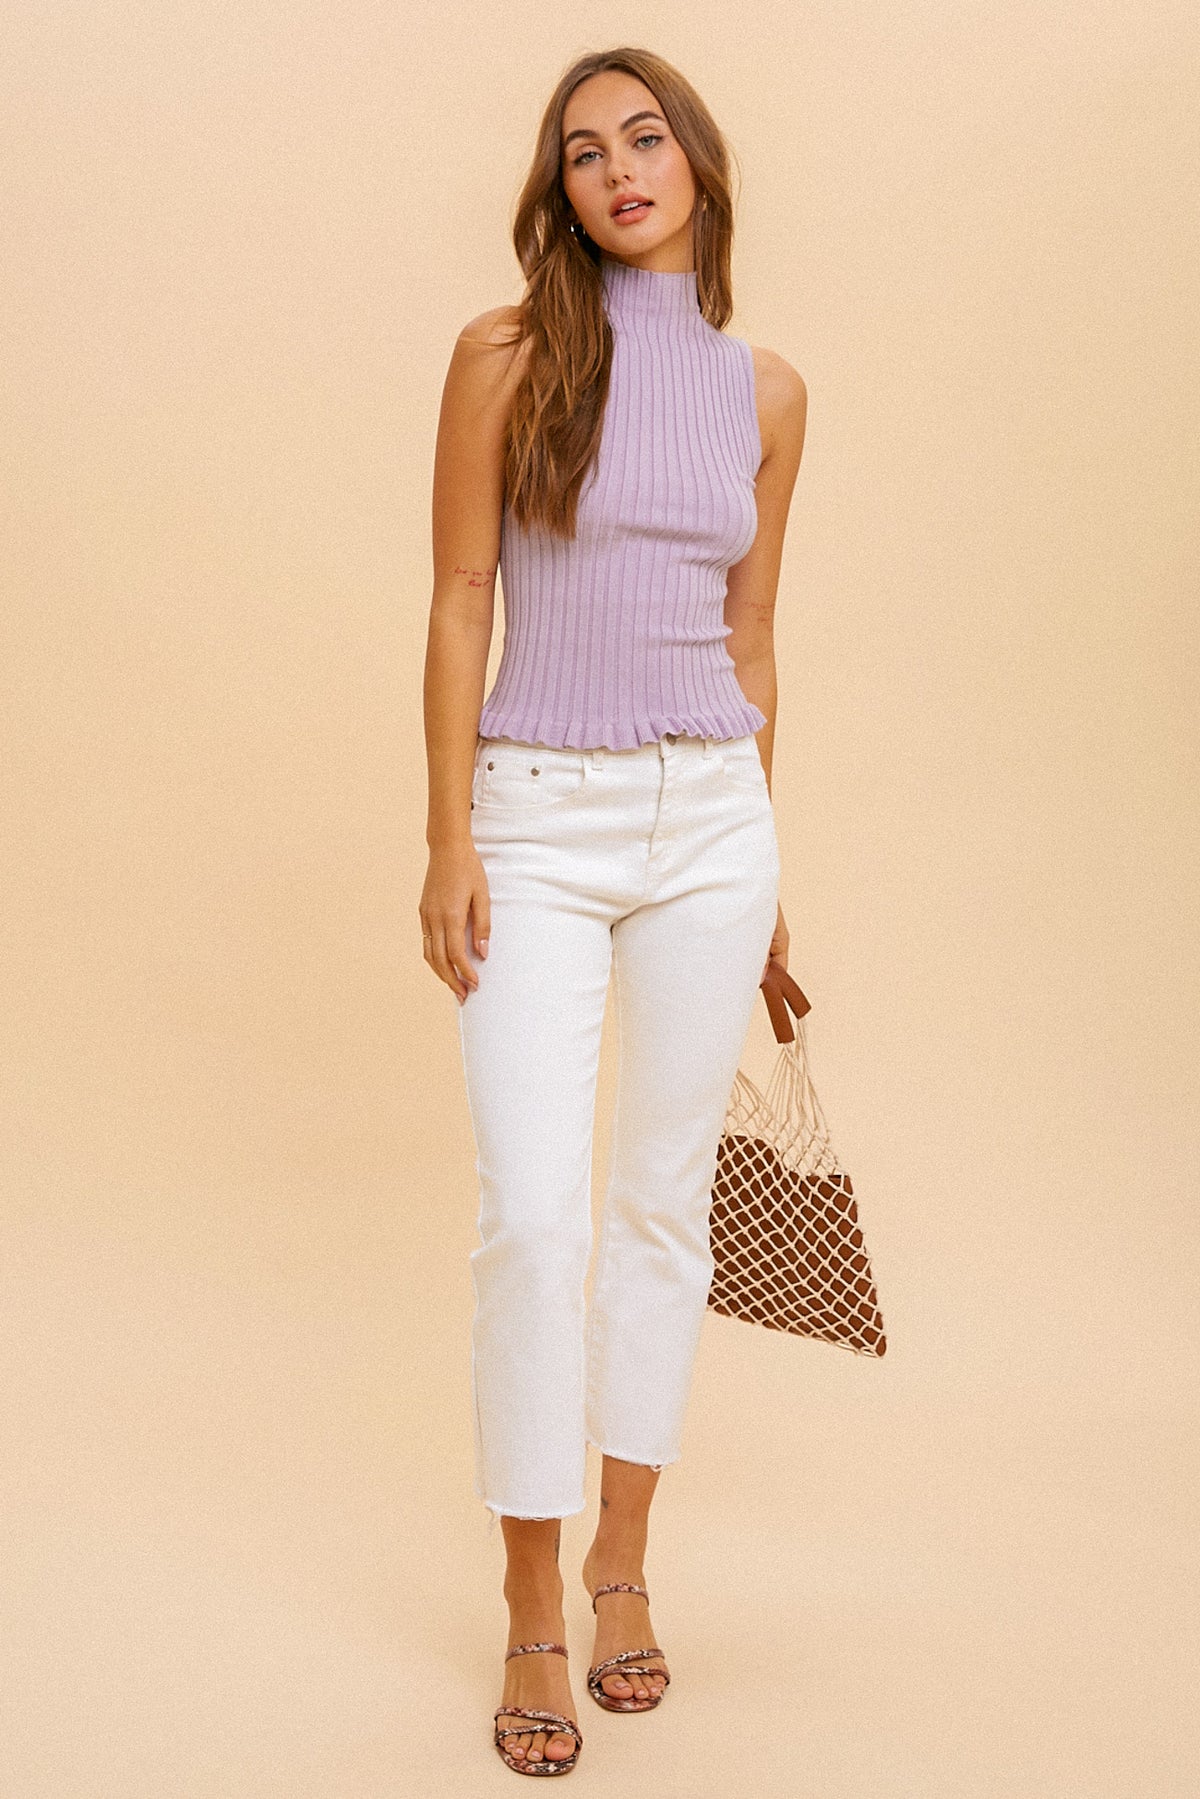 Tall Order Top - Lavender